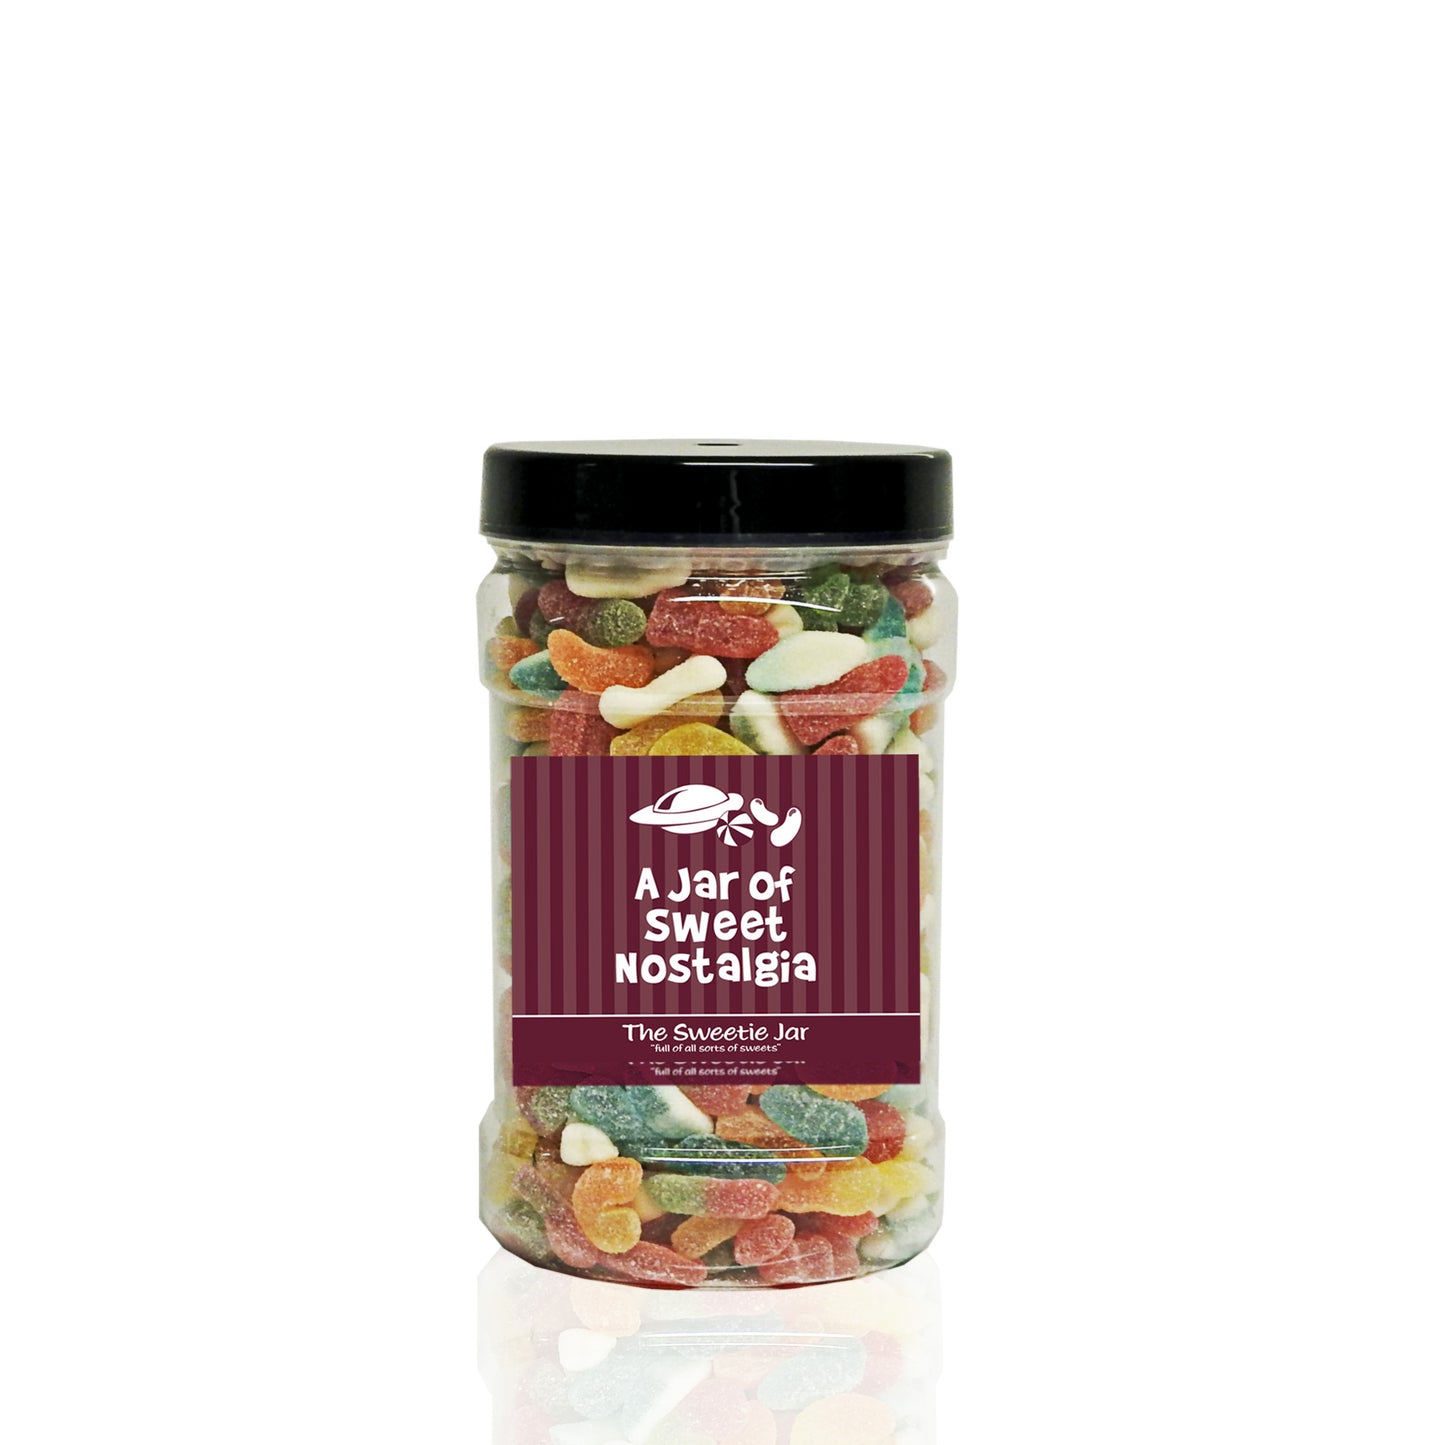 A Small Jar of Fizzy Jelly Mix - Sour Fruit Flavour Jelly Sweets